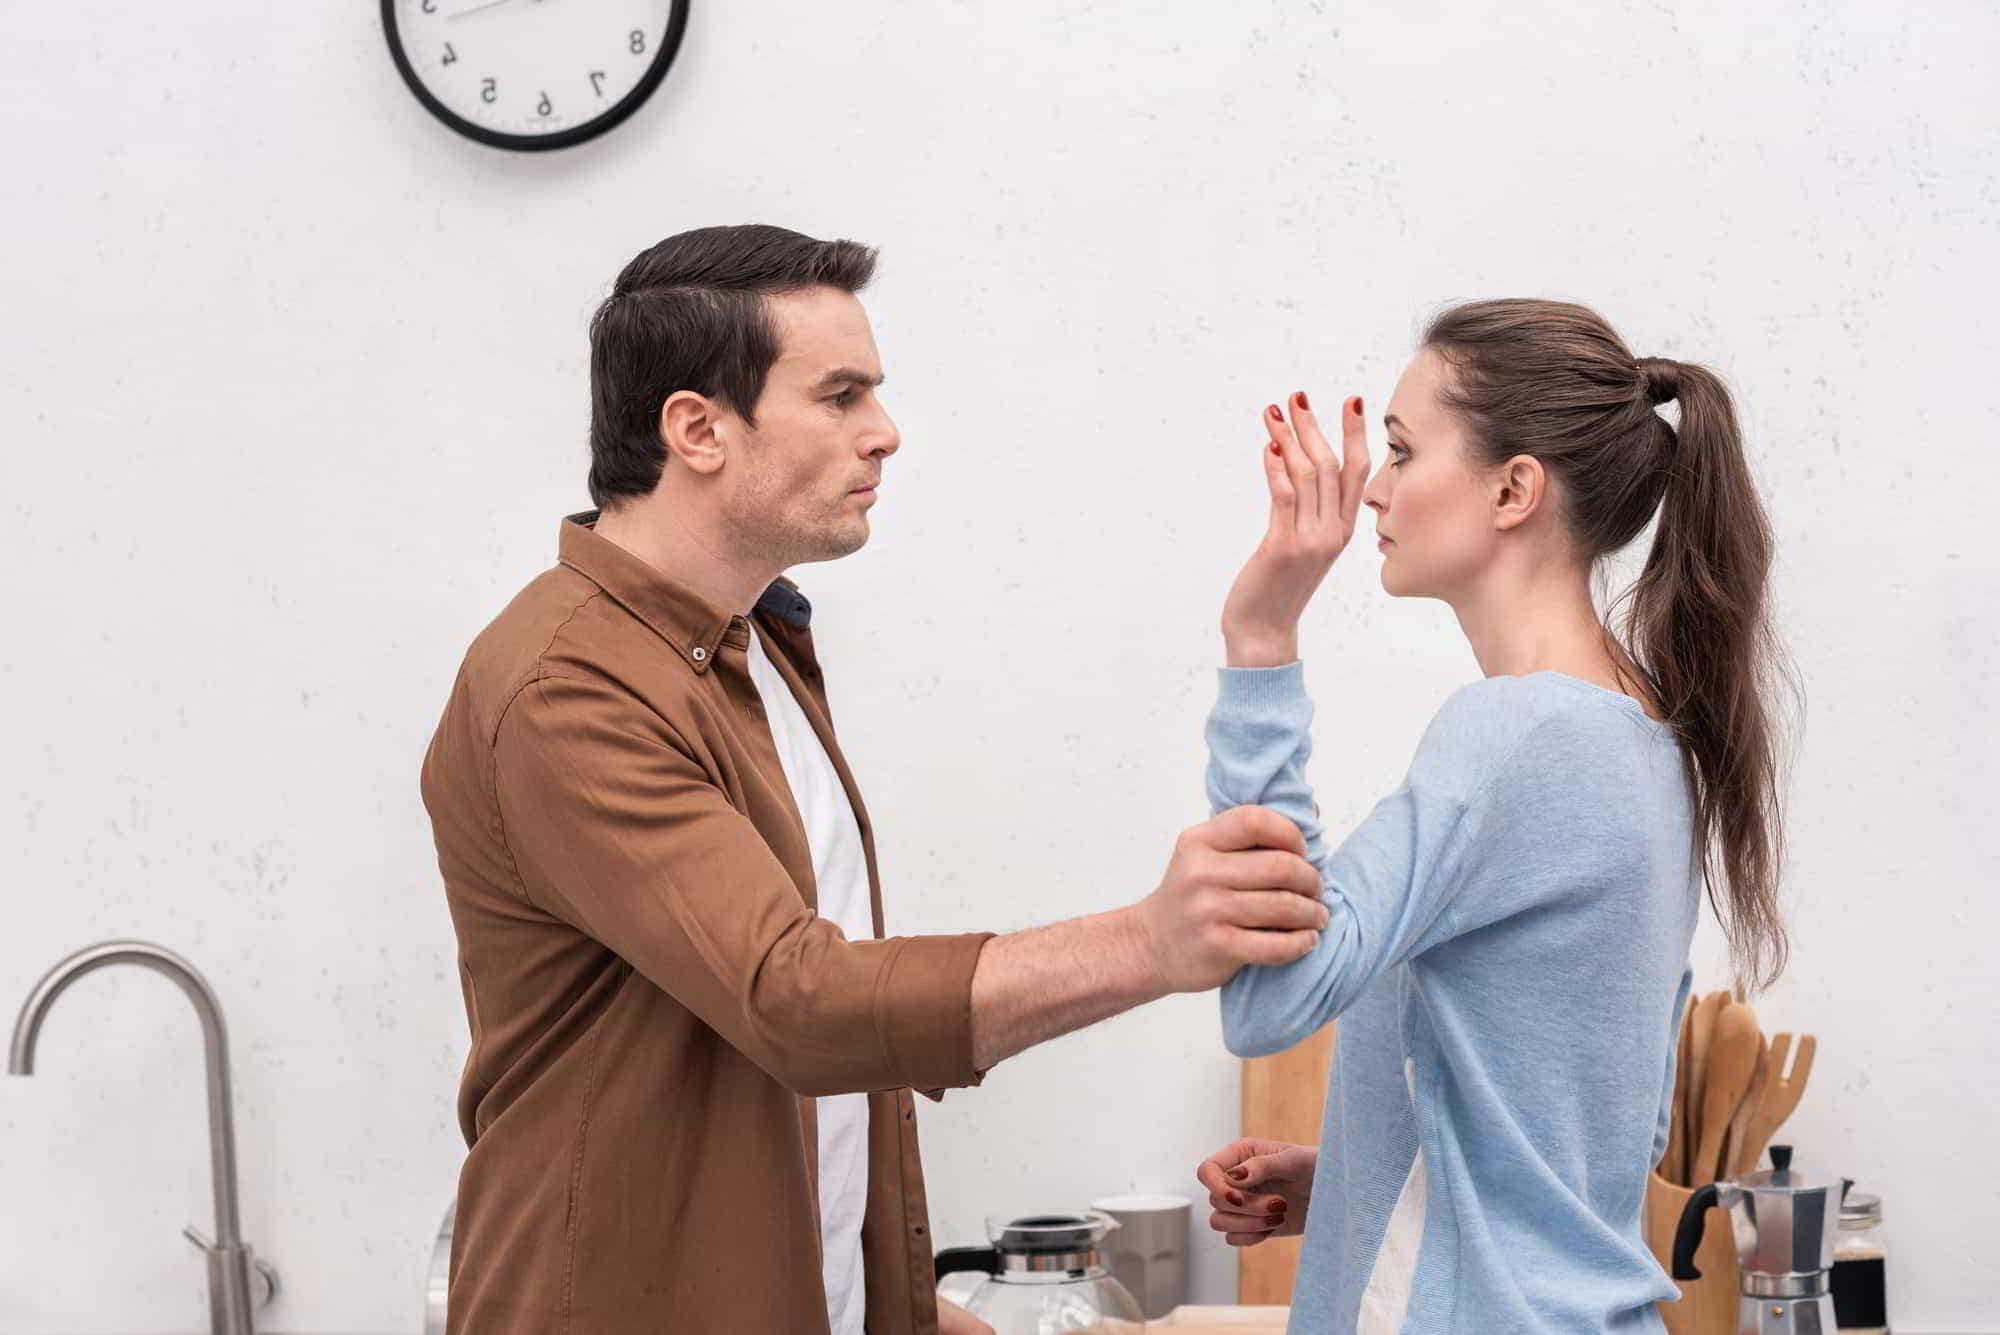 If my partner yells at me in public – It’s Violence